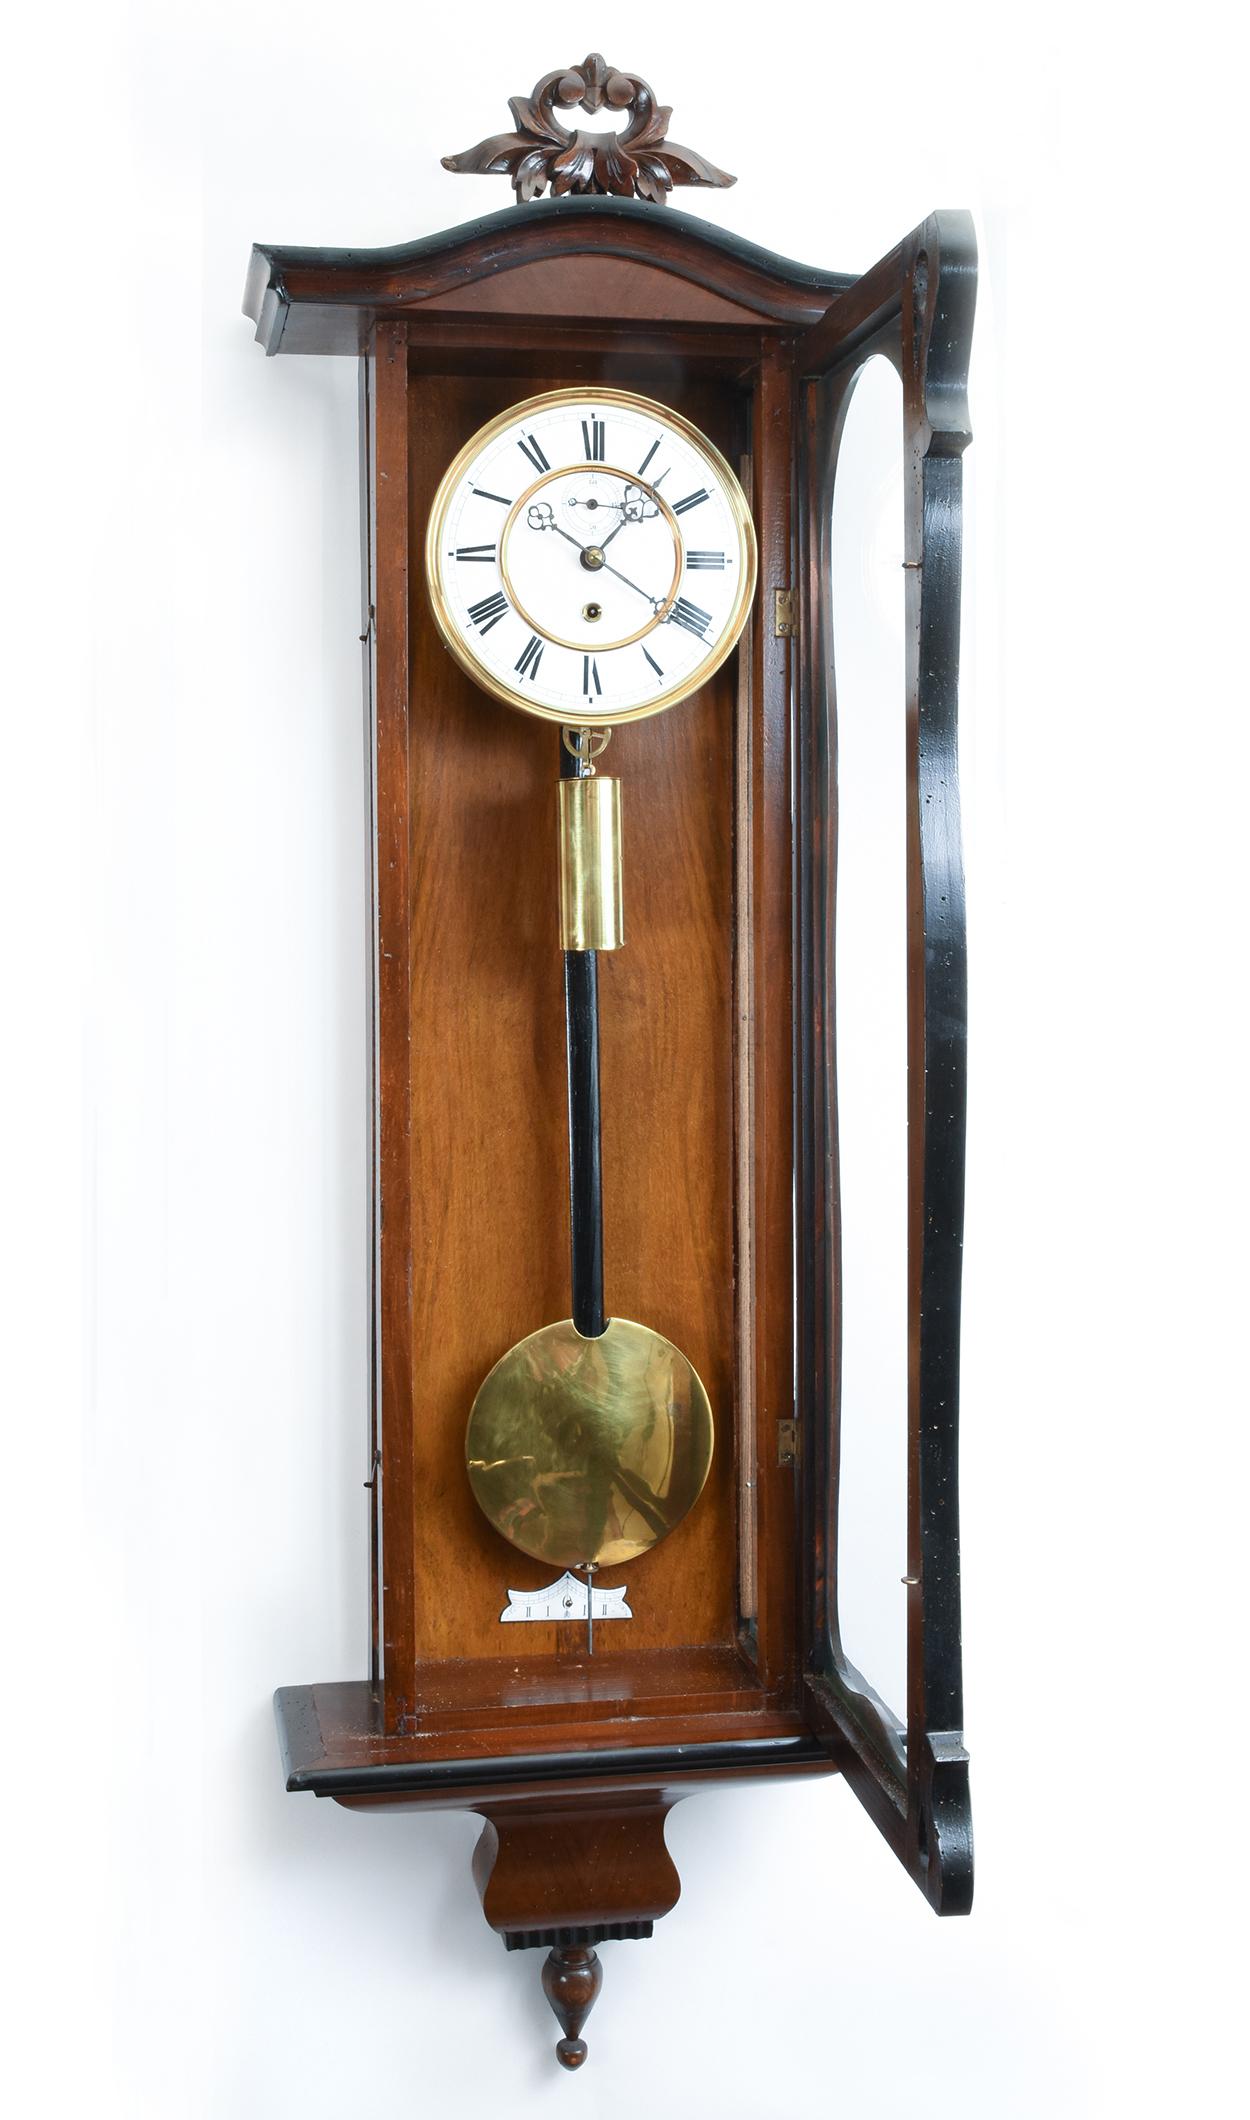 Mahogany wood frame case glass one weight Vienna Biedermeier style walnut case regulator wall clock. Becker stamped movement with porcelain face .The wall clock is in excellent antique condition. Minor wear consistent with use / age.